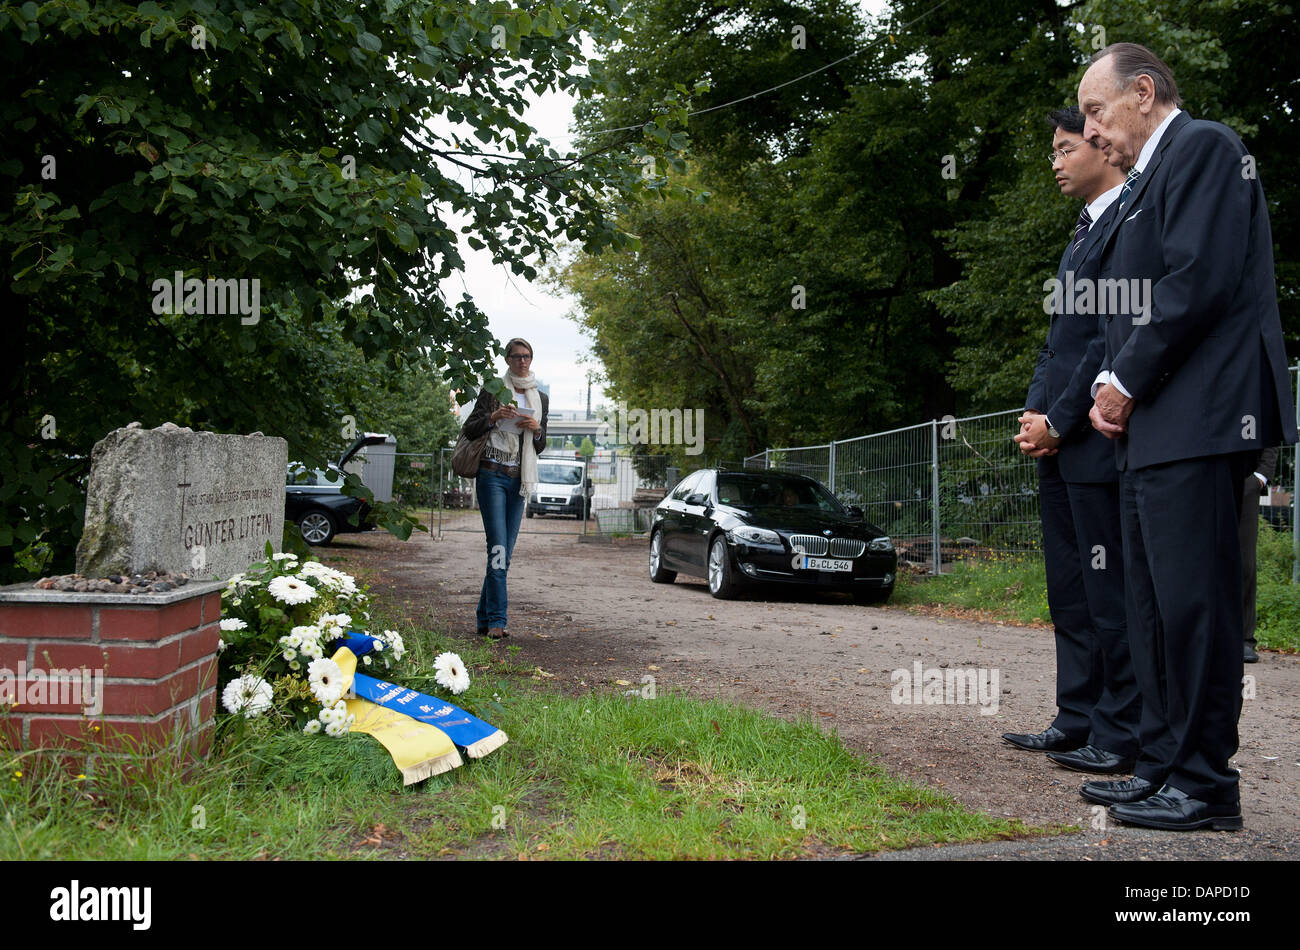 The former foreign minister and today's honorary FDP chair Hans-Dietrich Genscher (R) and FDP chairman and Economy Minister Philipp Roesler lay down a wreath at the memorial stone of Guenter Litfin at the Sandkrug bridge in Berlin, Germany, 12 August 2011. They wish to remember the victims of the Berlin Wall, which was constructed 50 years ago on 13 August 1961. Photo: HANNIBAL Stock Photo